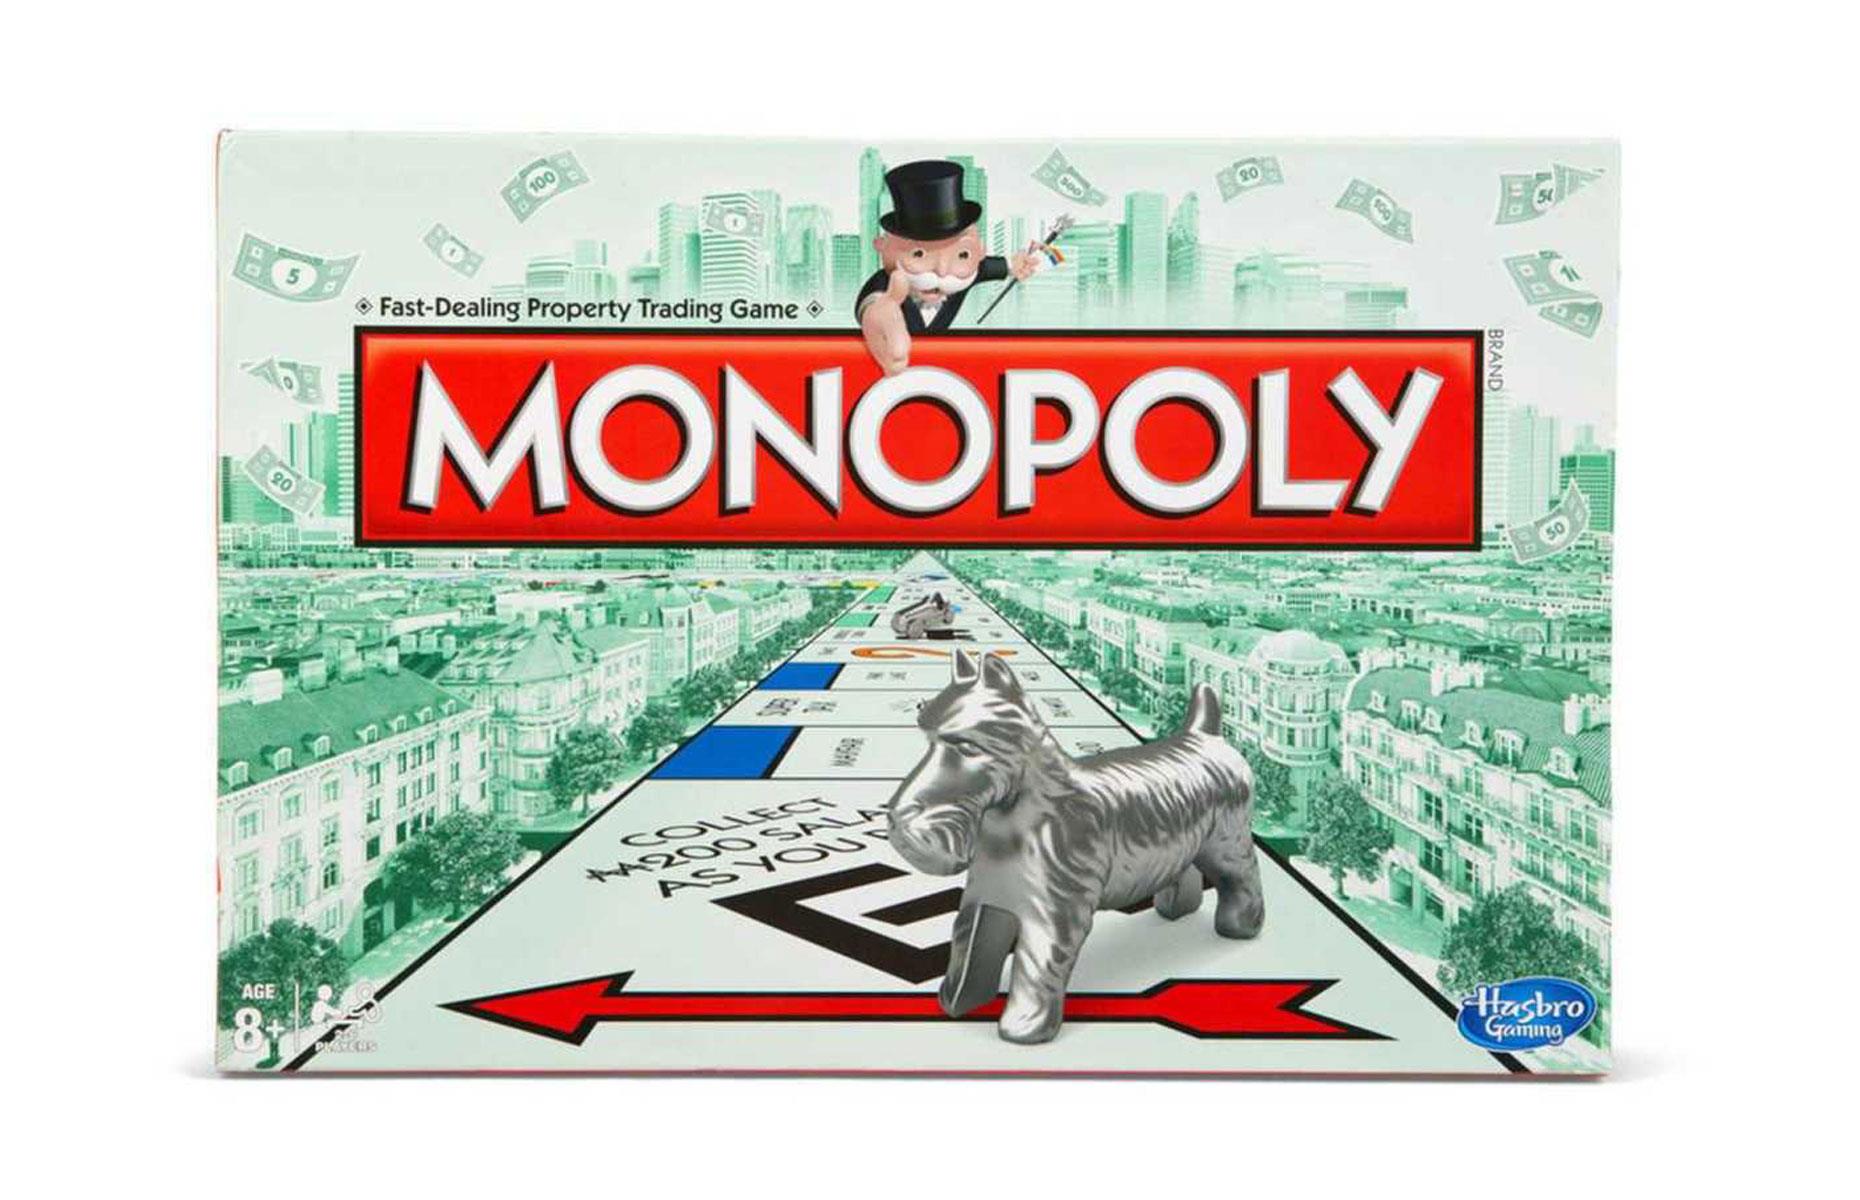 Monopoly – you've got to speculate to accumulate